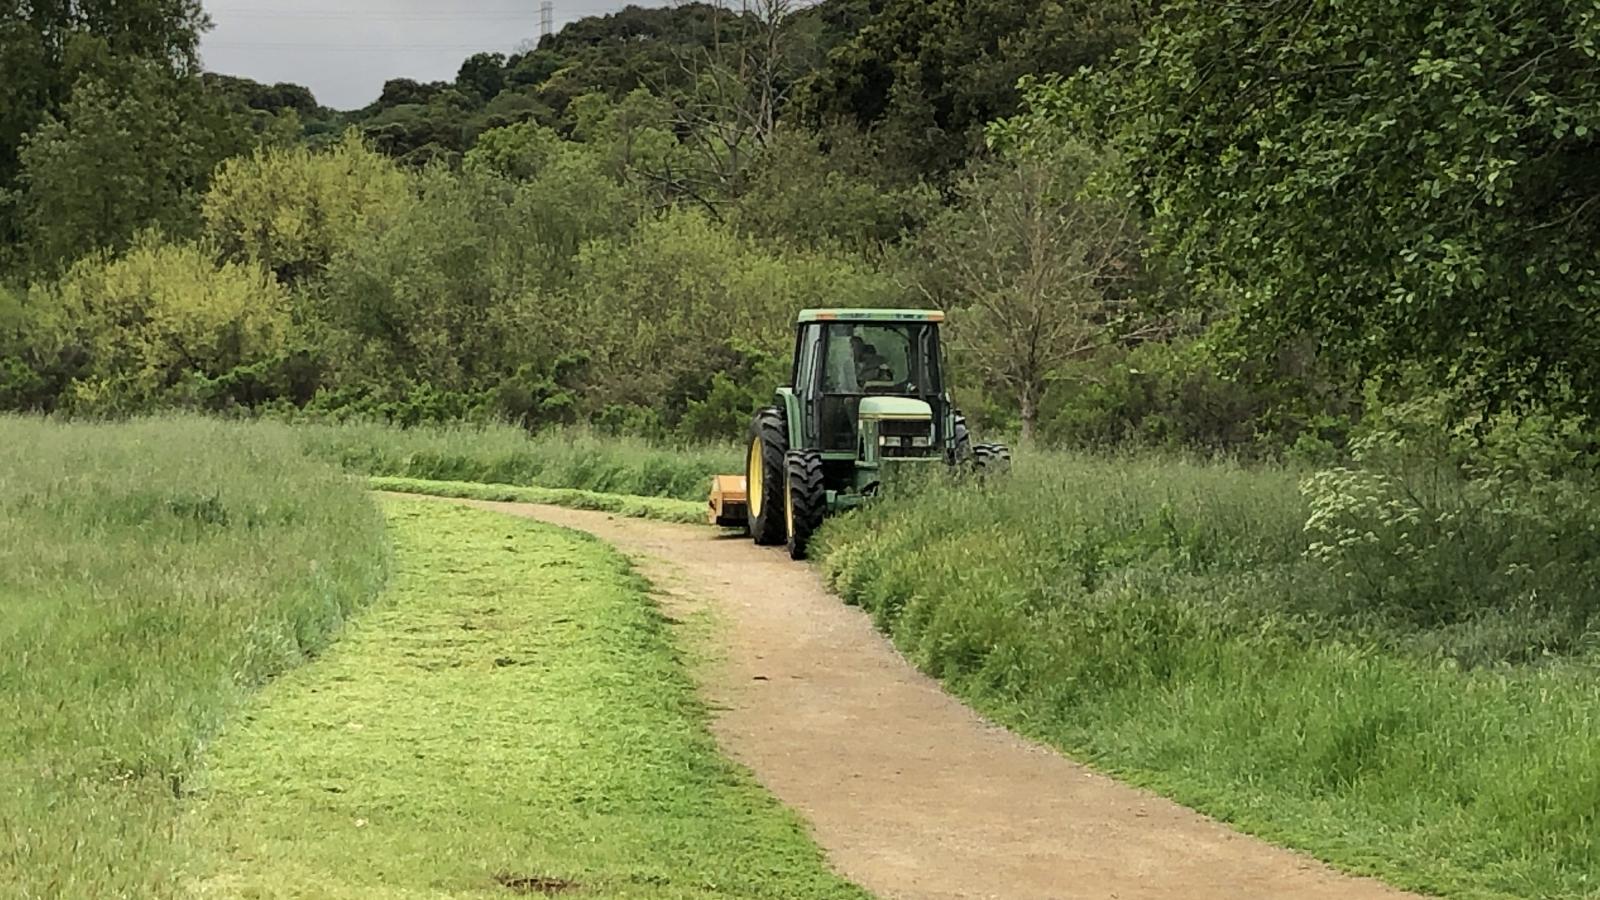 Rancho San Antonio Preserve mowing for fire safety, April 2020